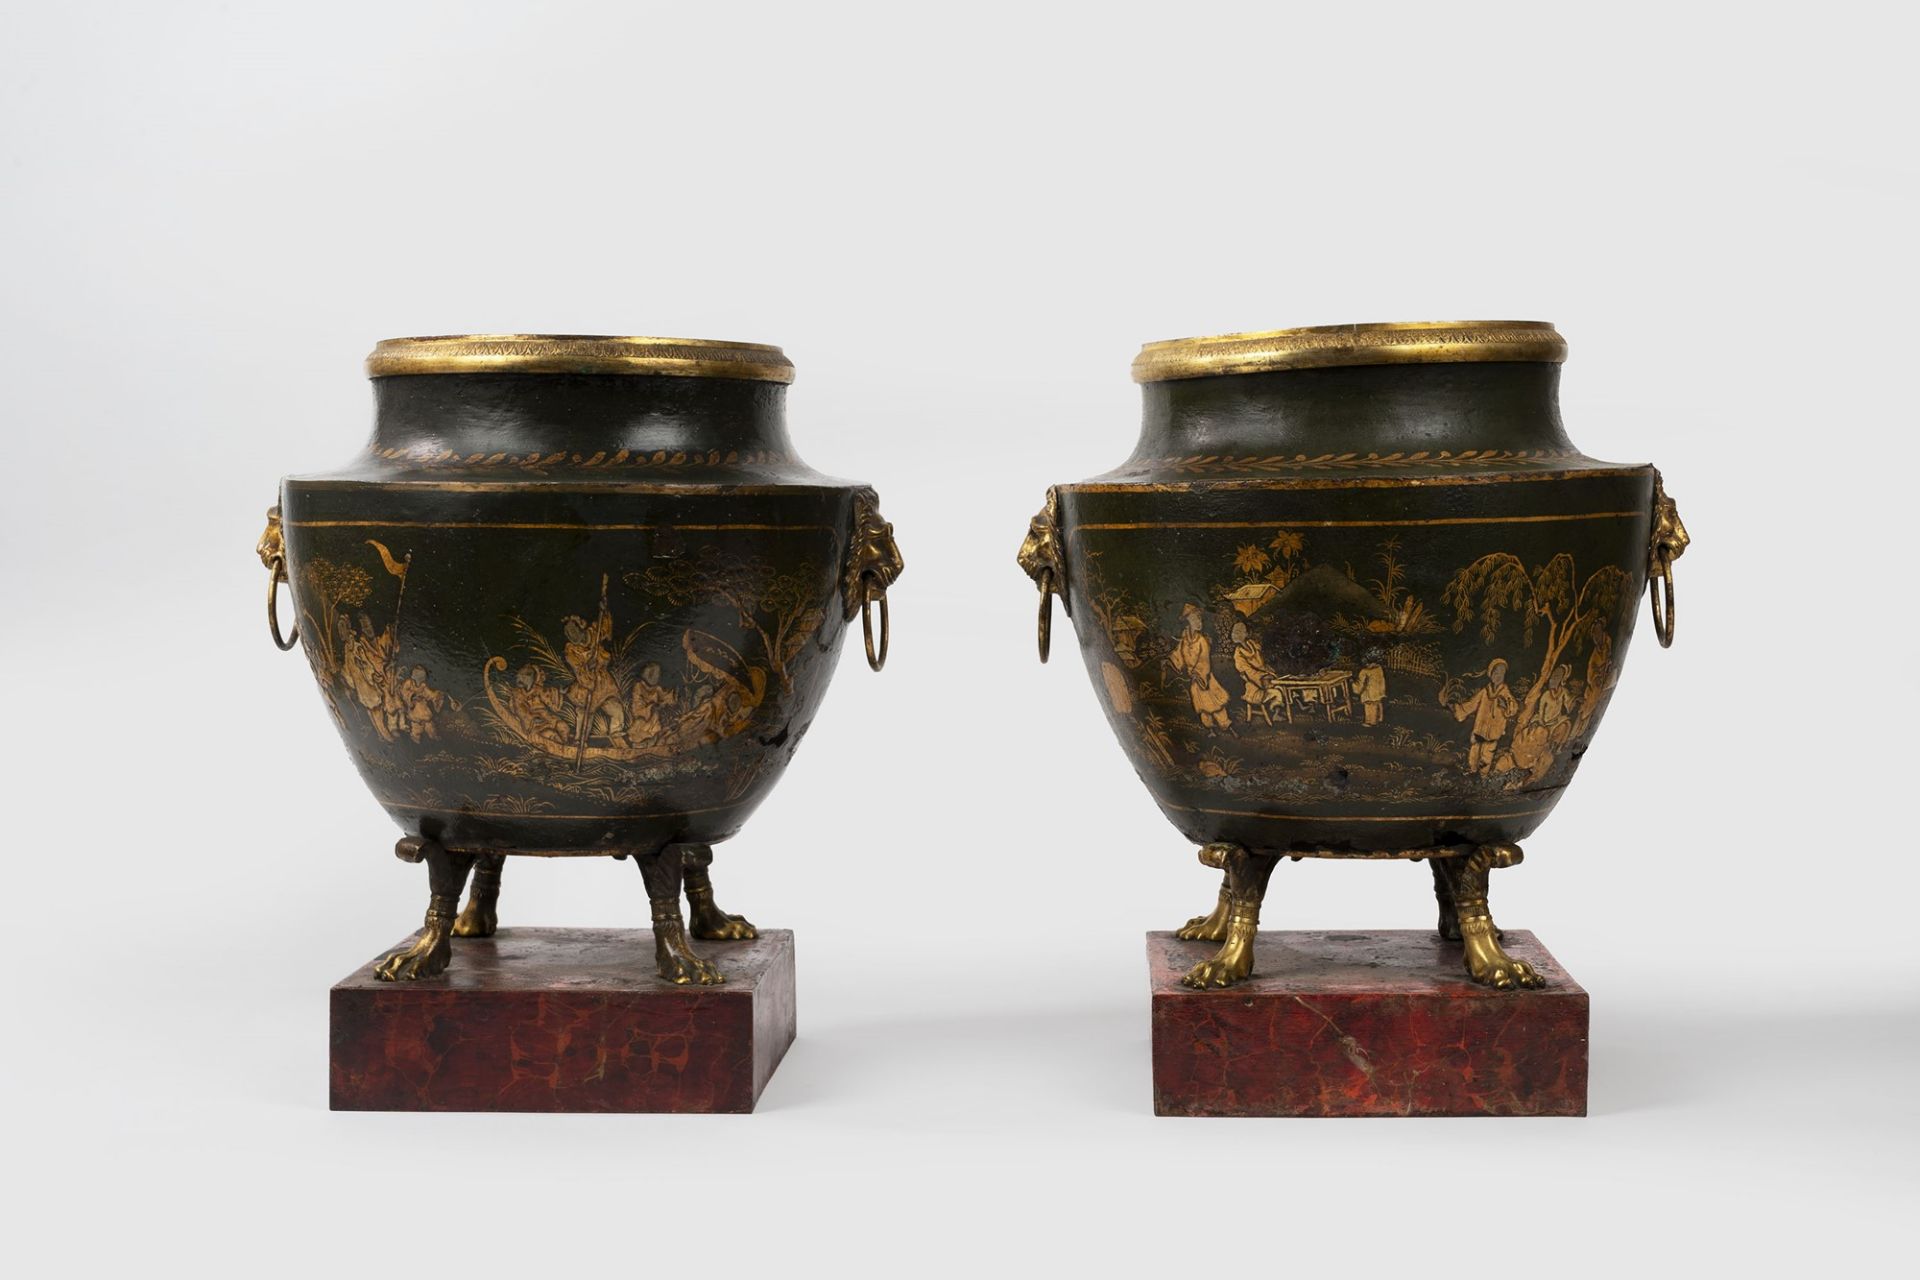 Pair of potiches in metal and gilded bronze decorated with chinoiserie, 18th-19th centuries